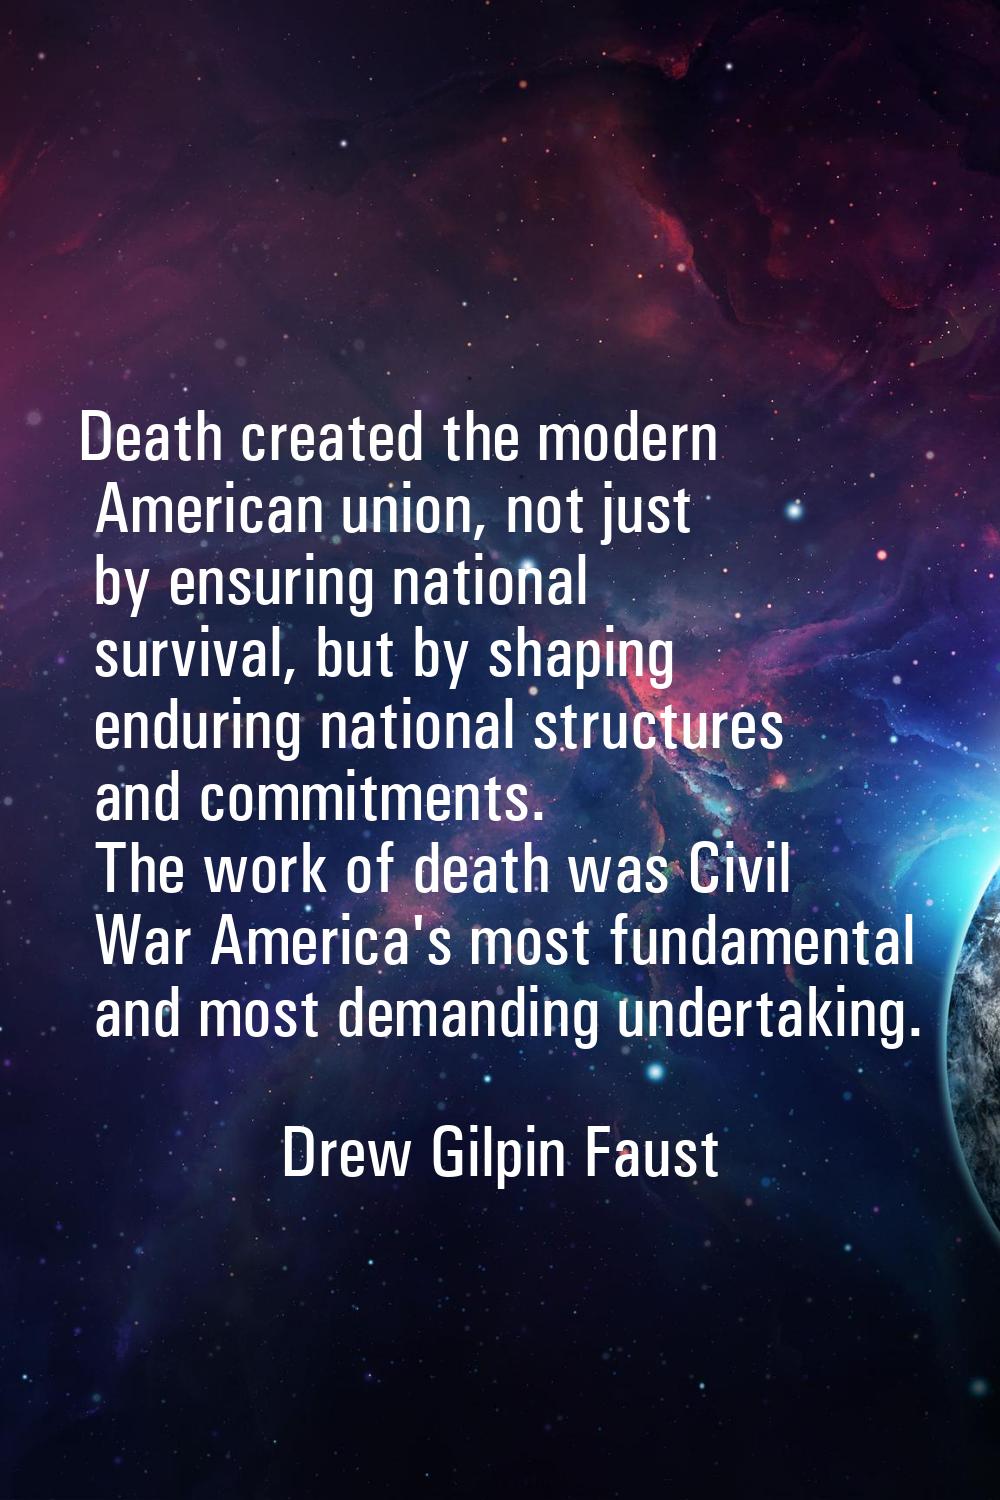 Death created the modern American union, not just by ensuring national survival, but by shaping end